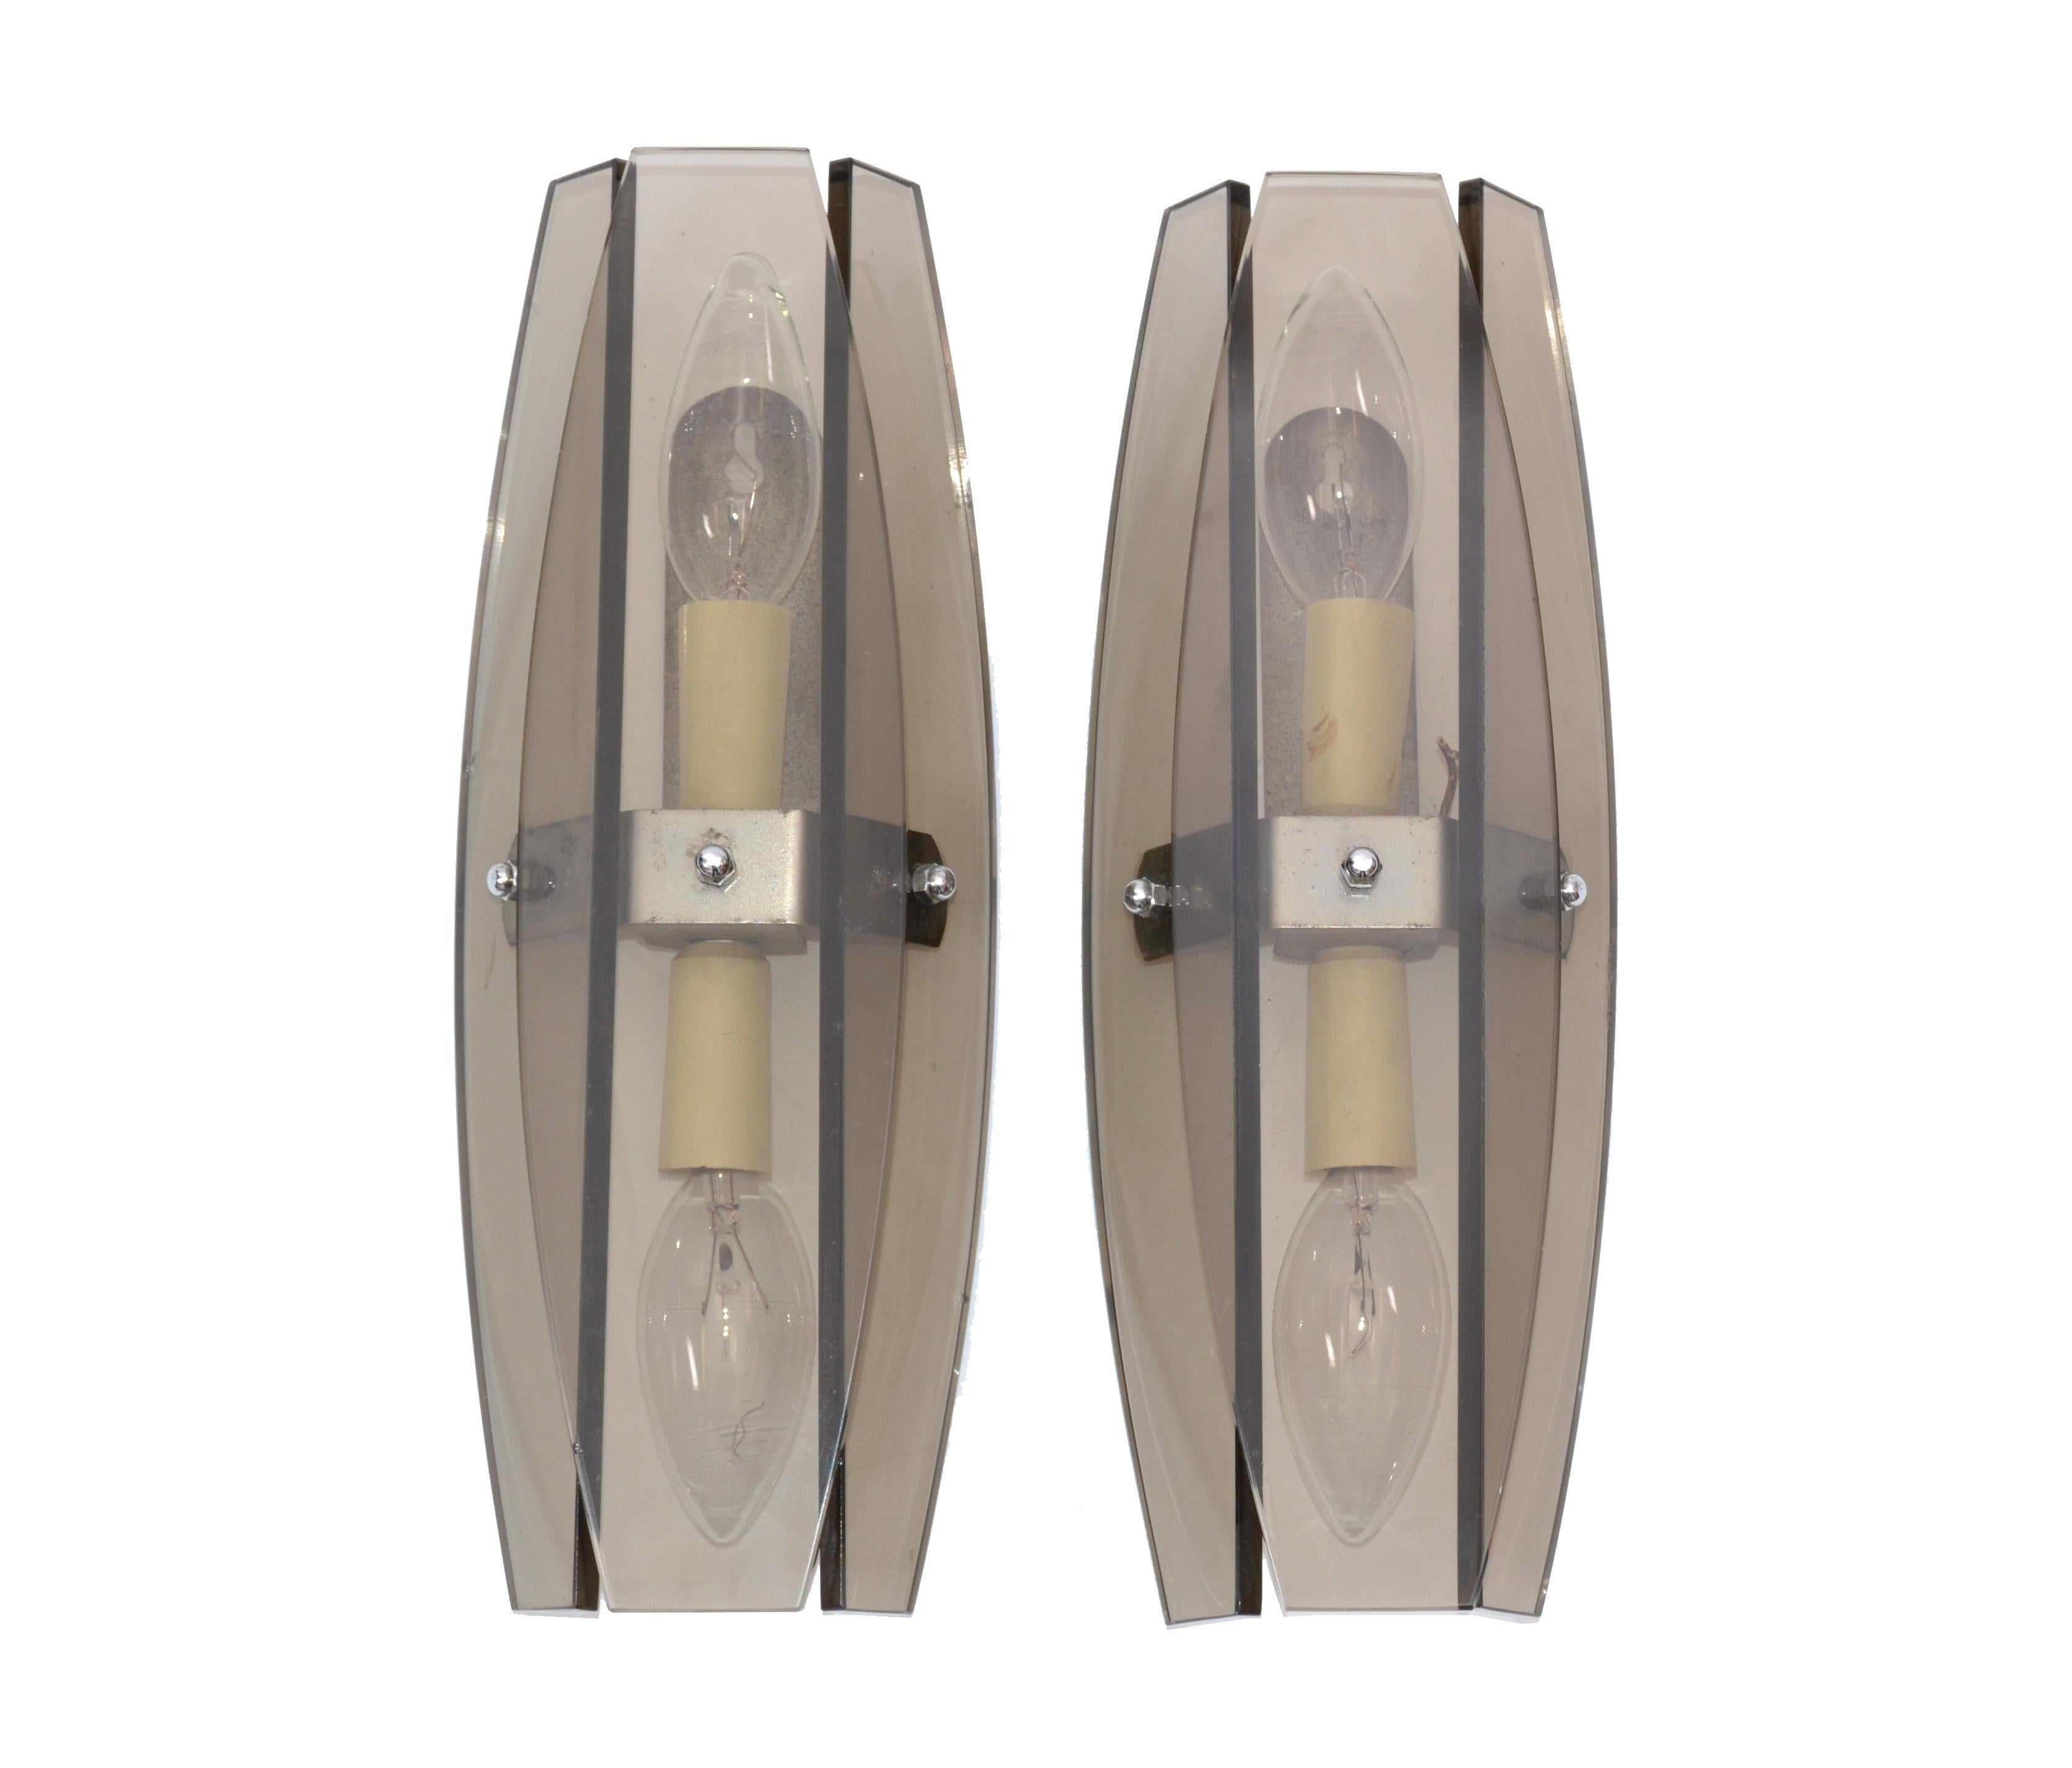 A pair of Italian Mid-Century Modern sconces by Fontana Arte featuring panels of smoked, beveled glass.
U.S. wired and in working condition.
Each sconce takes 2 x 40W bulb per sconce.
Back plate: 4 inches H. x 1.5 inches W.